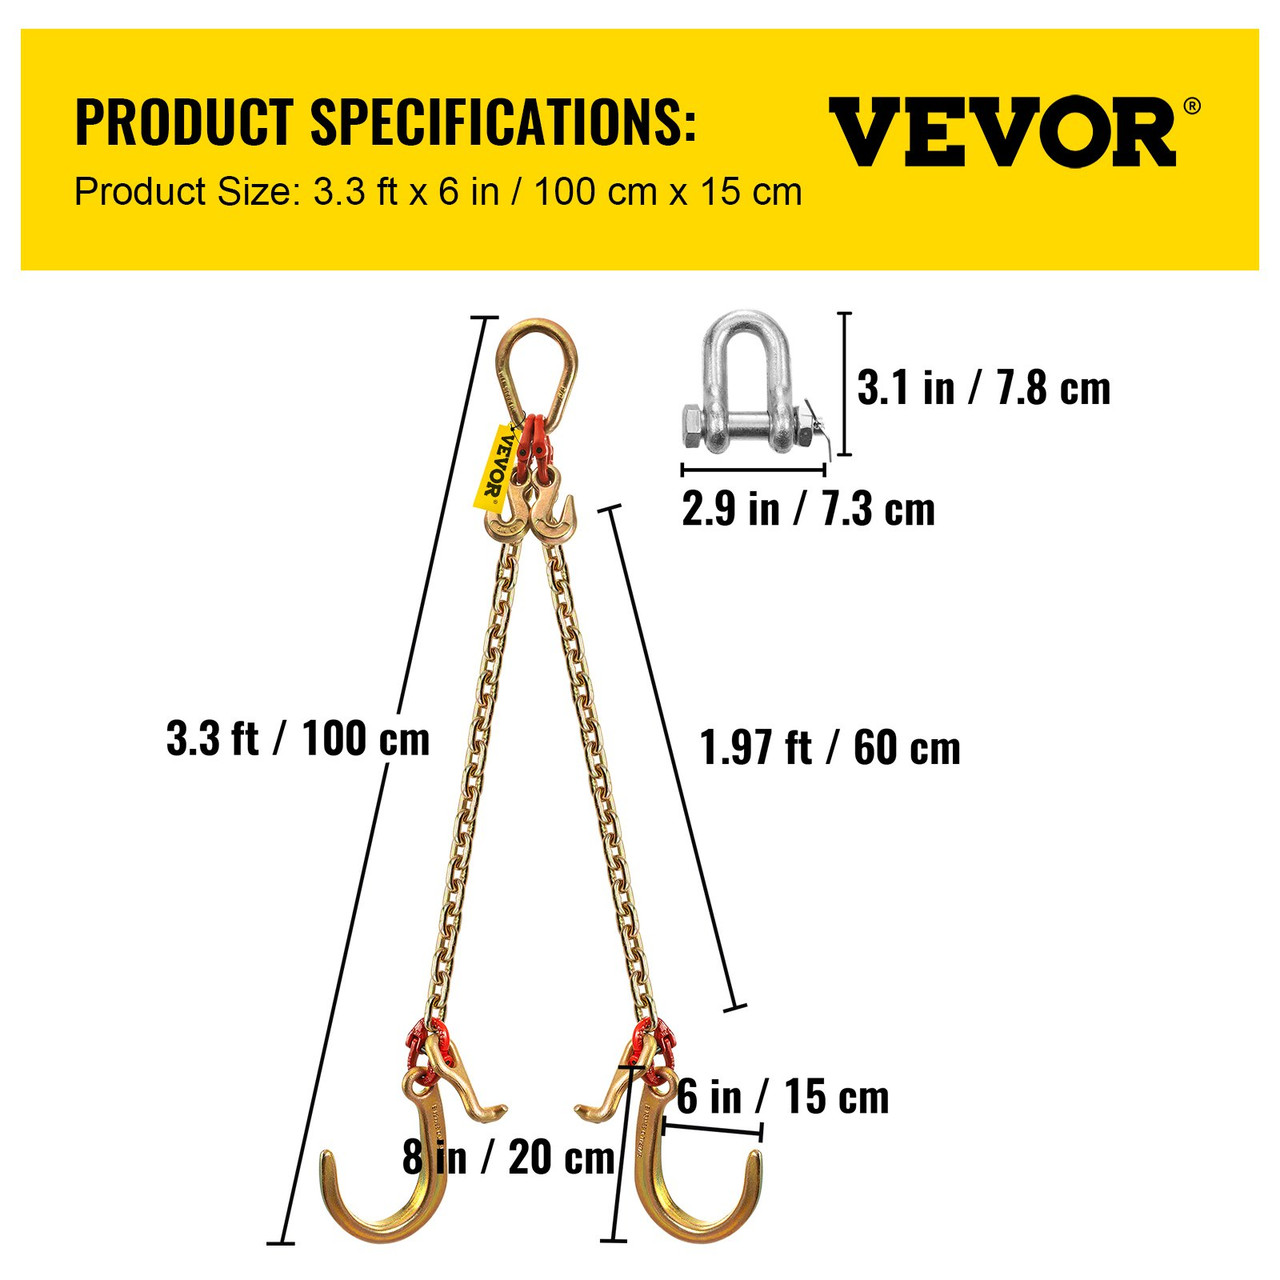 VEVOR J Hook Chain 5/16 inch Adjustable Tow Chains with Heavy-Duty Grade 80  Grab Hooks J-Hooks Tow Hooks and Shorteners